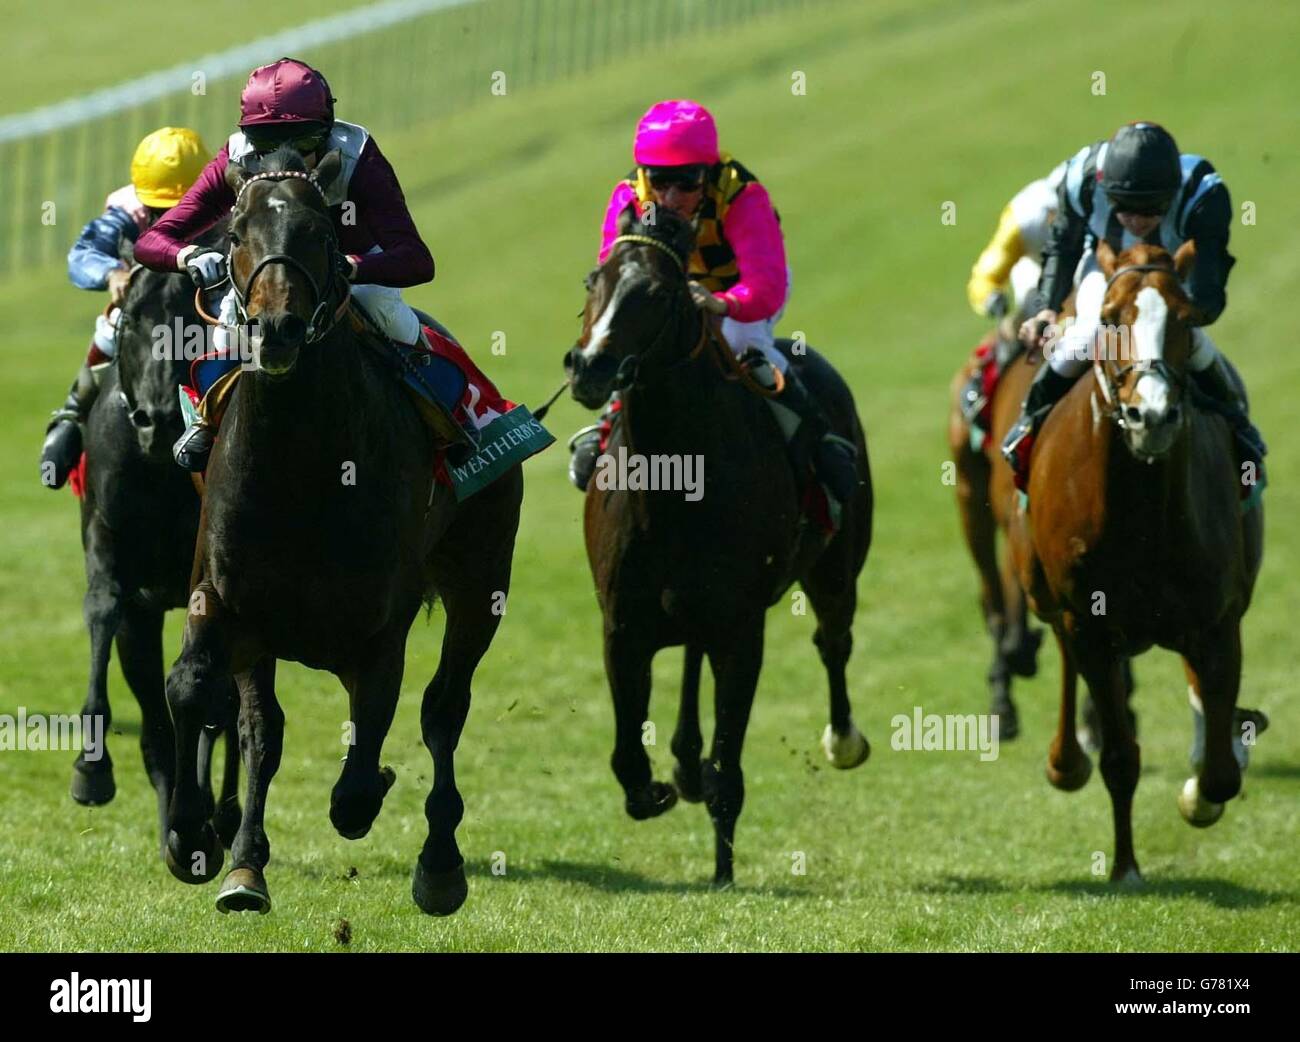 Olden Times (front left), ridden by Kieren Fallon, on his way to winning The Weatherbys Earl of Sefton Stakes over the Rowley Mile racecourse at Newmarket. Stock Photo